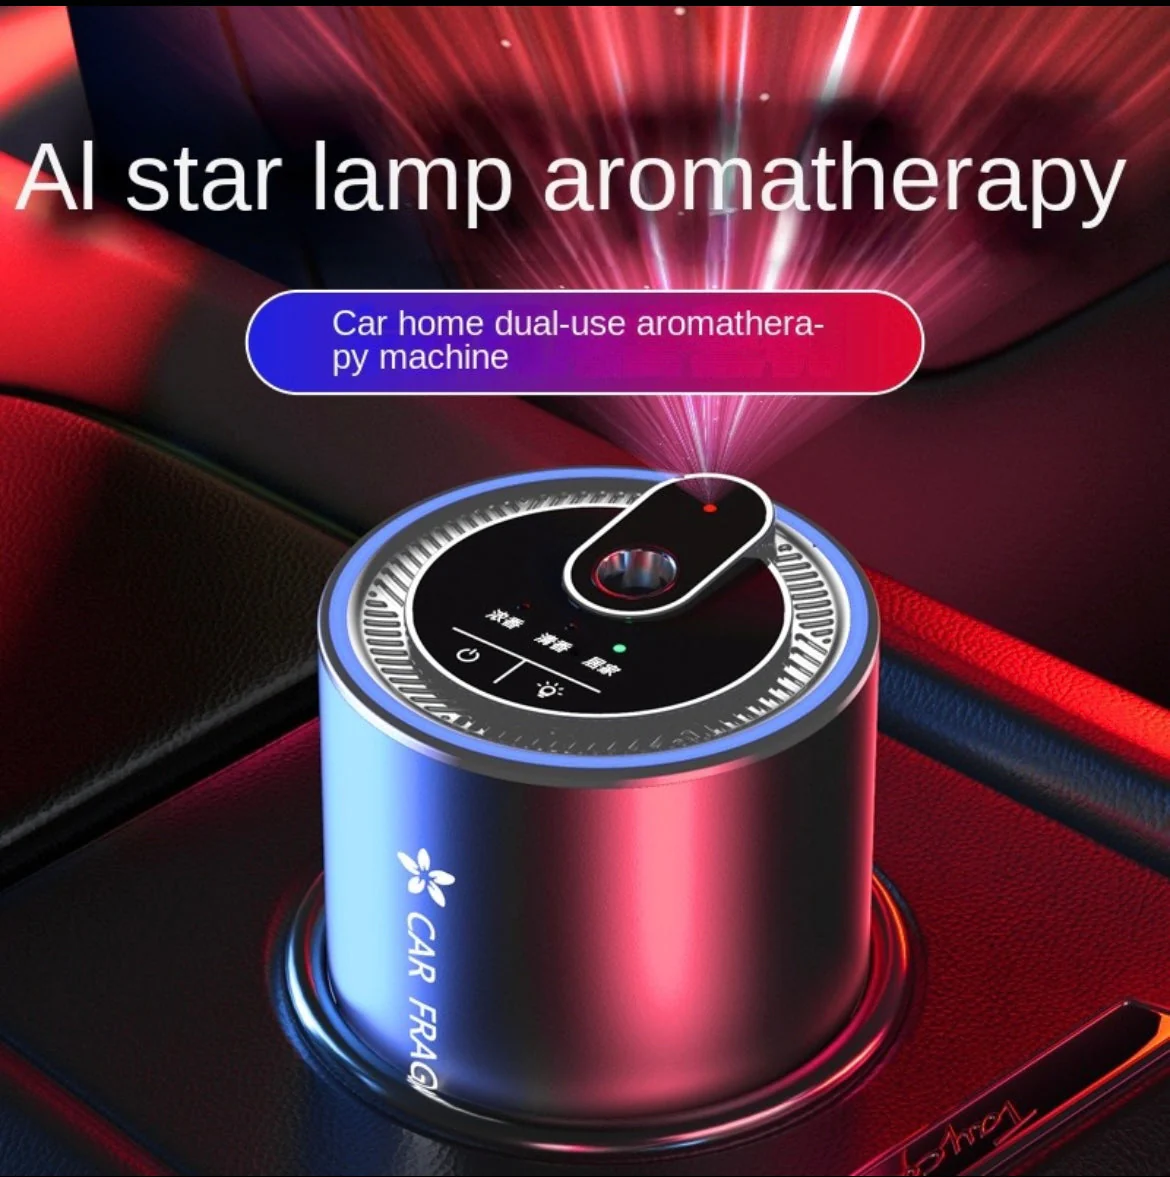 🔥HOT SALE 50% OFF 🚗LED Light Starry Projection Light Home Perfume Auto Air Purifier Aromatherapy